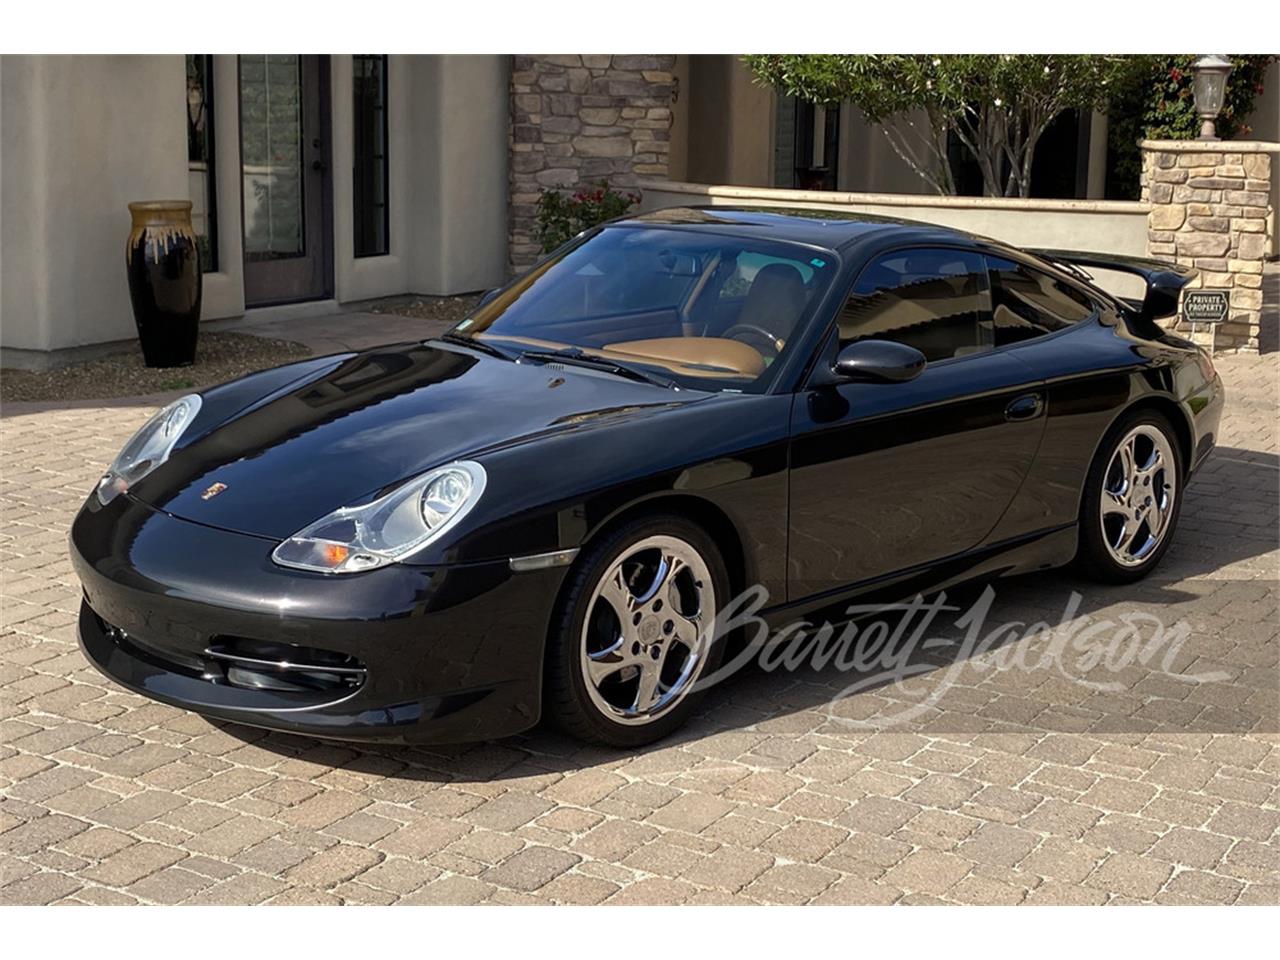 For Sale at Auction: 2000 Porsche 911 Carrera in Scottsdale, Arizona for sale in Scottsdale, AZ